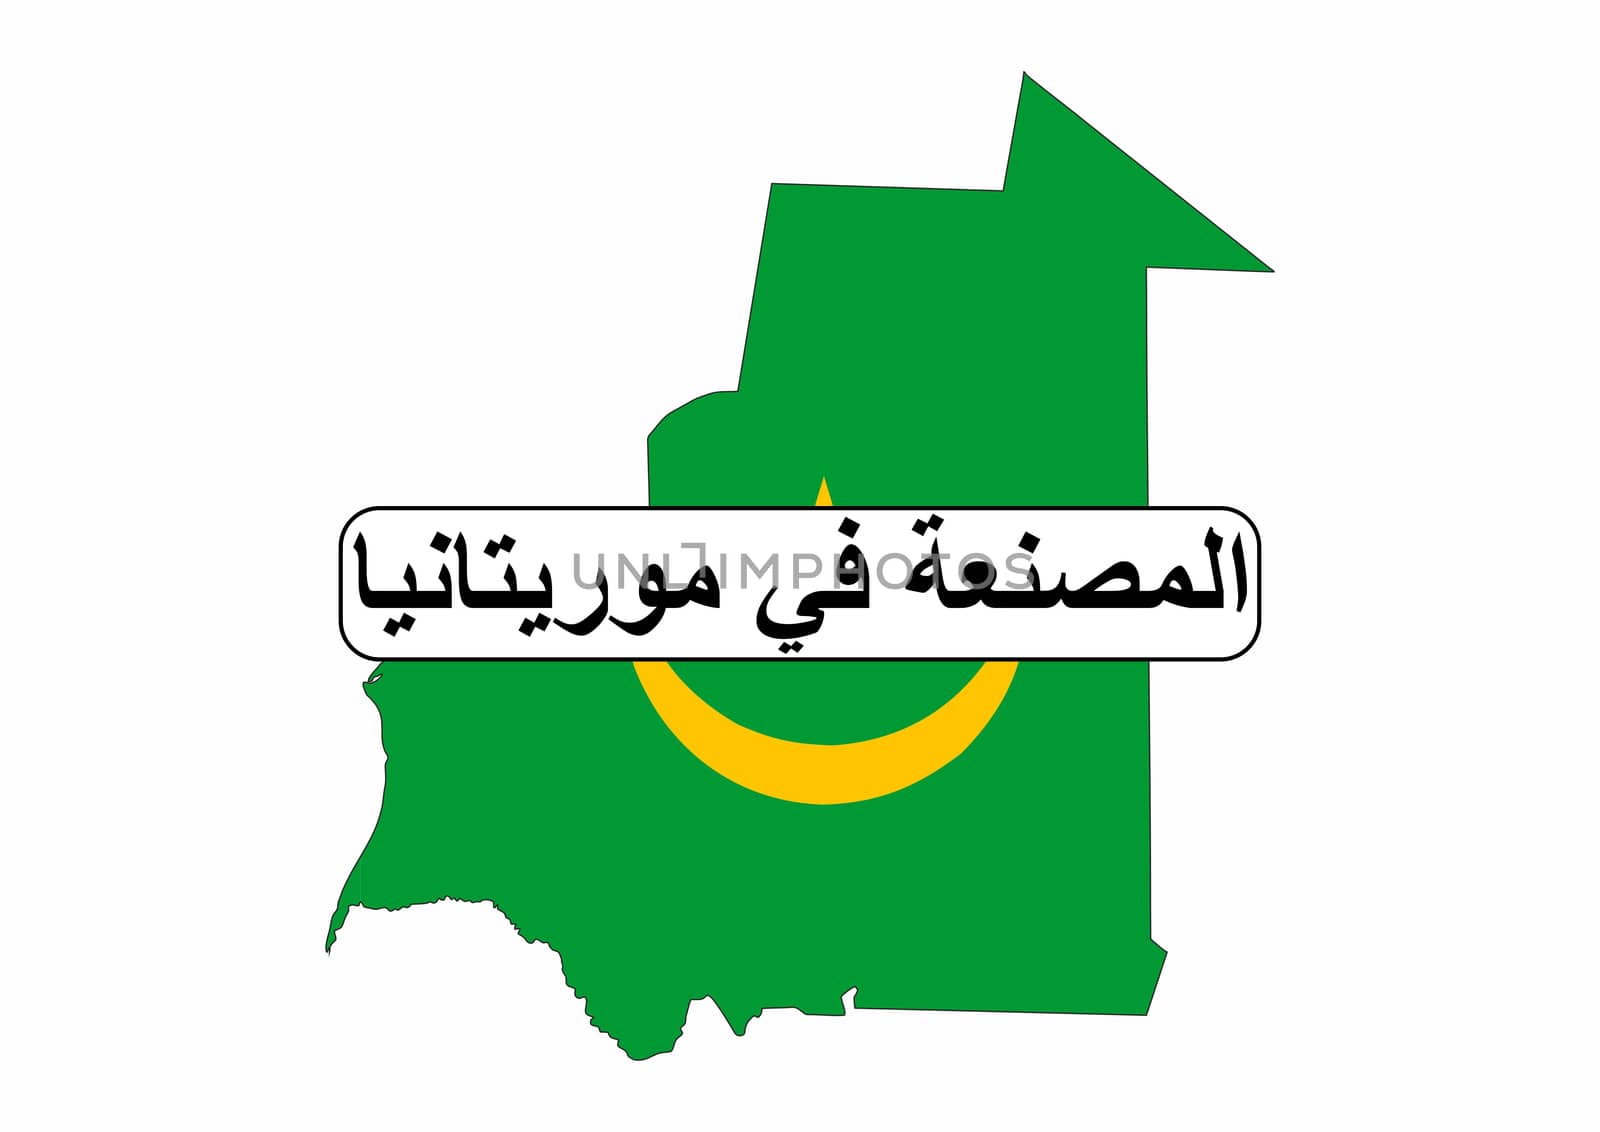 made in mauritania country national flag map shape with text